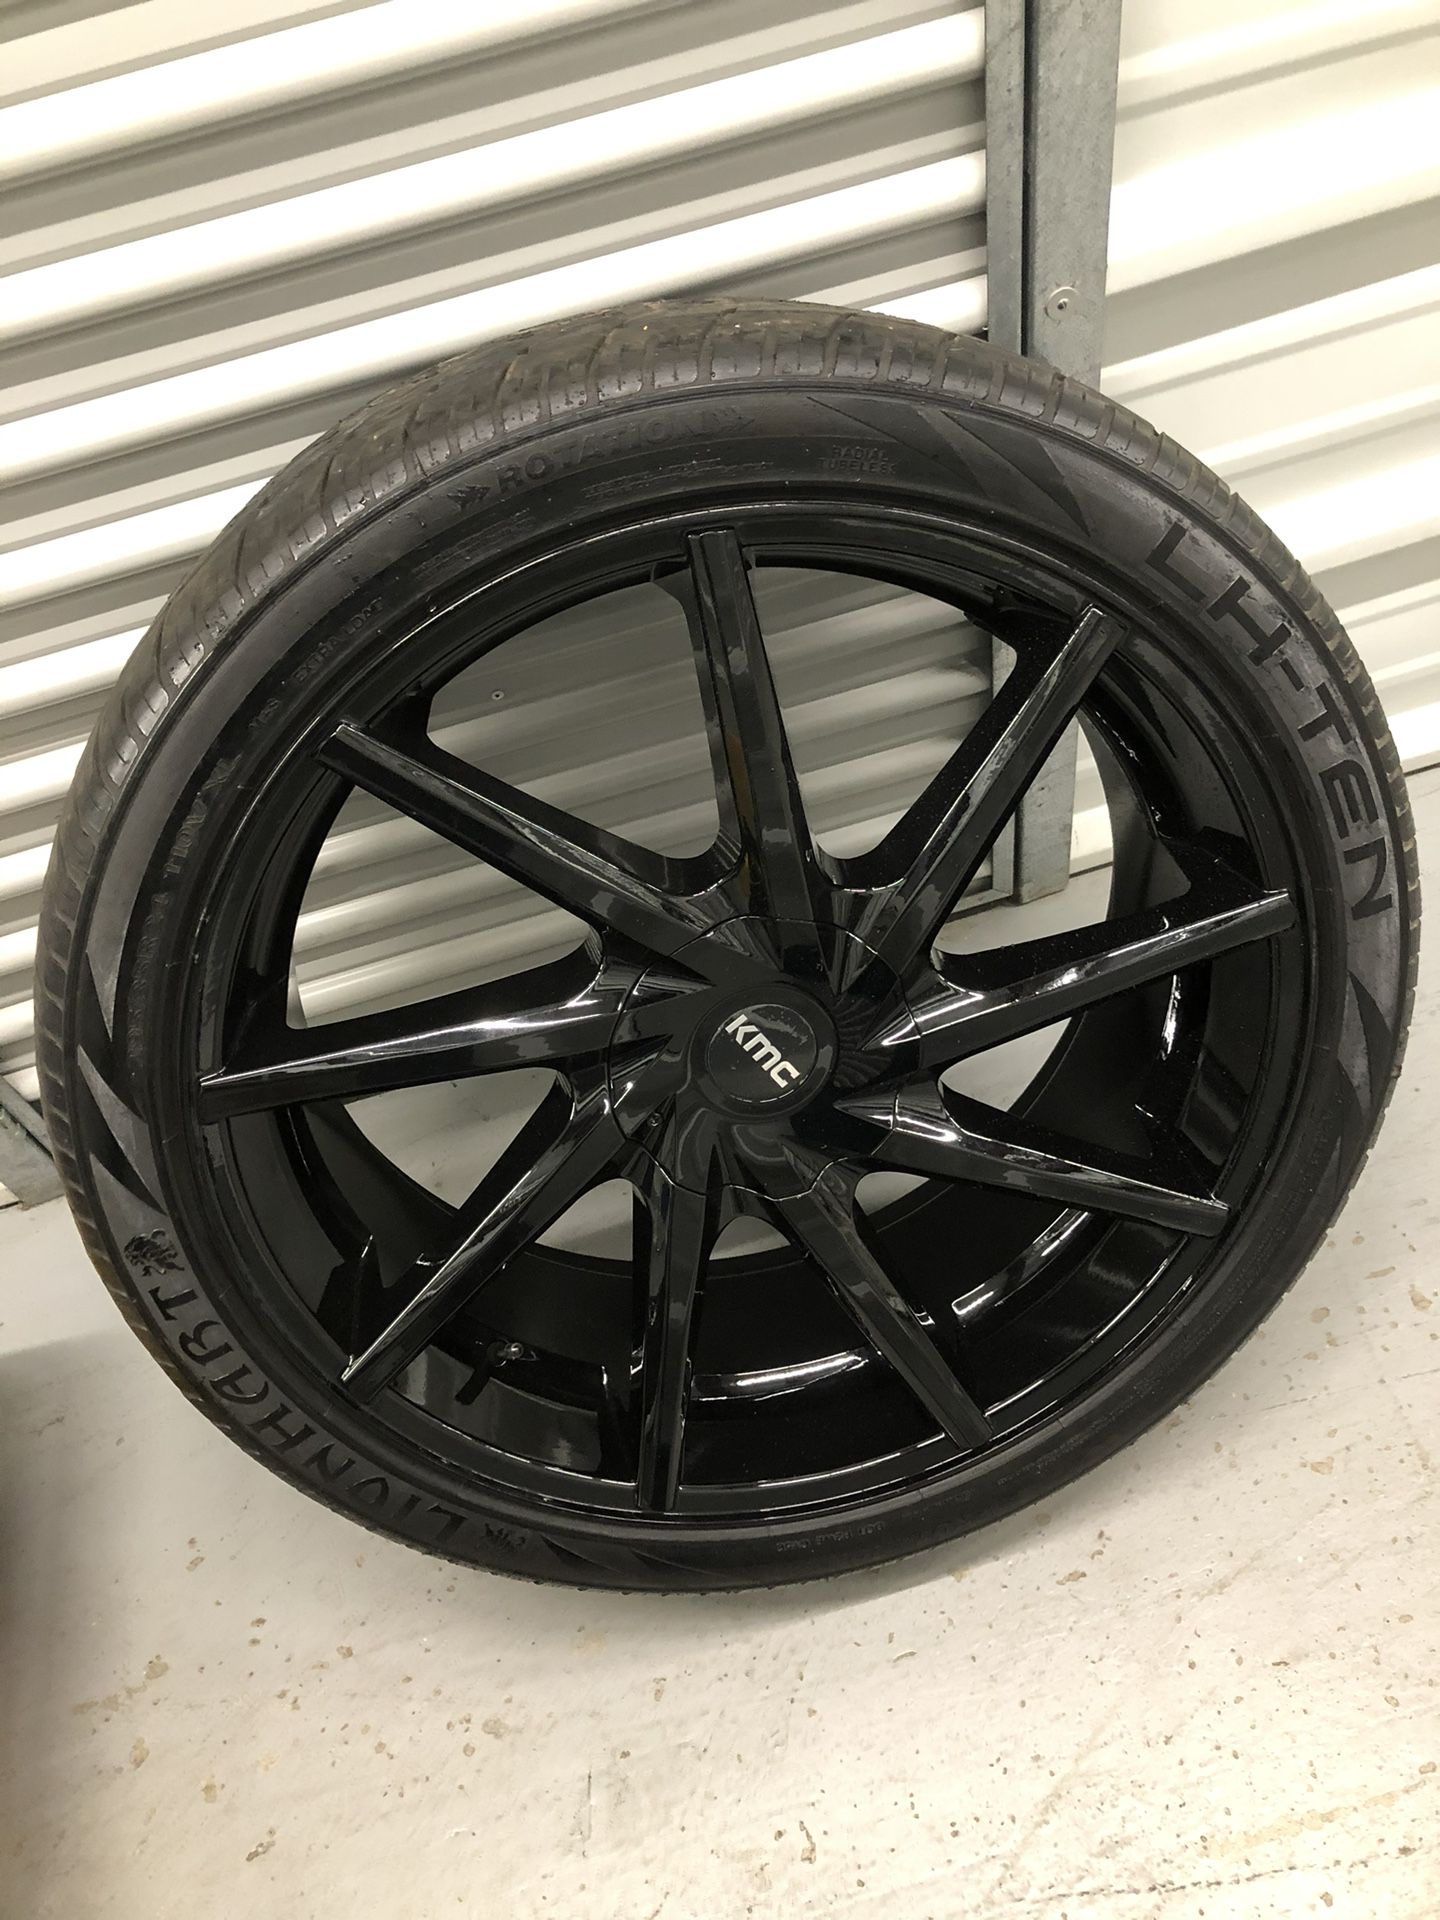 24 Inch Rim with Tire (ONLY 1 RIM)